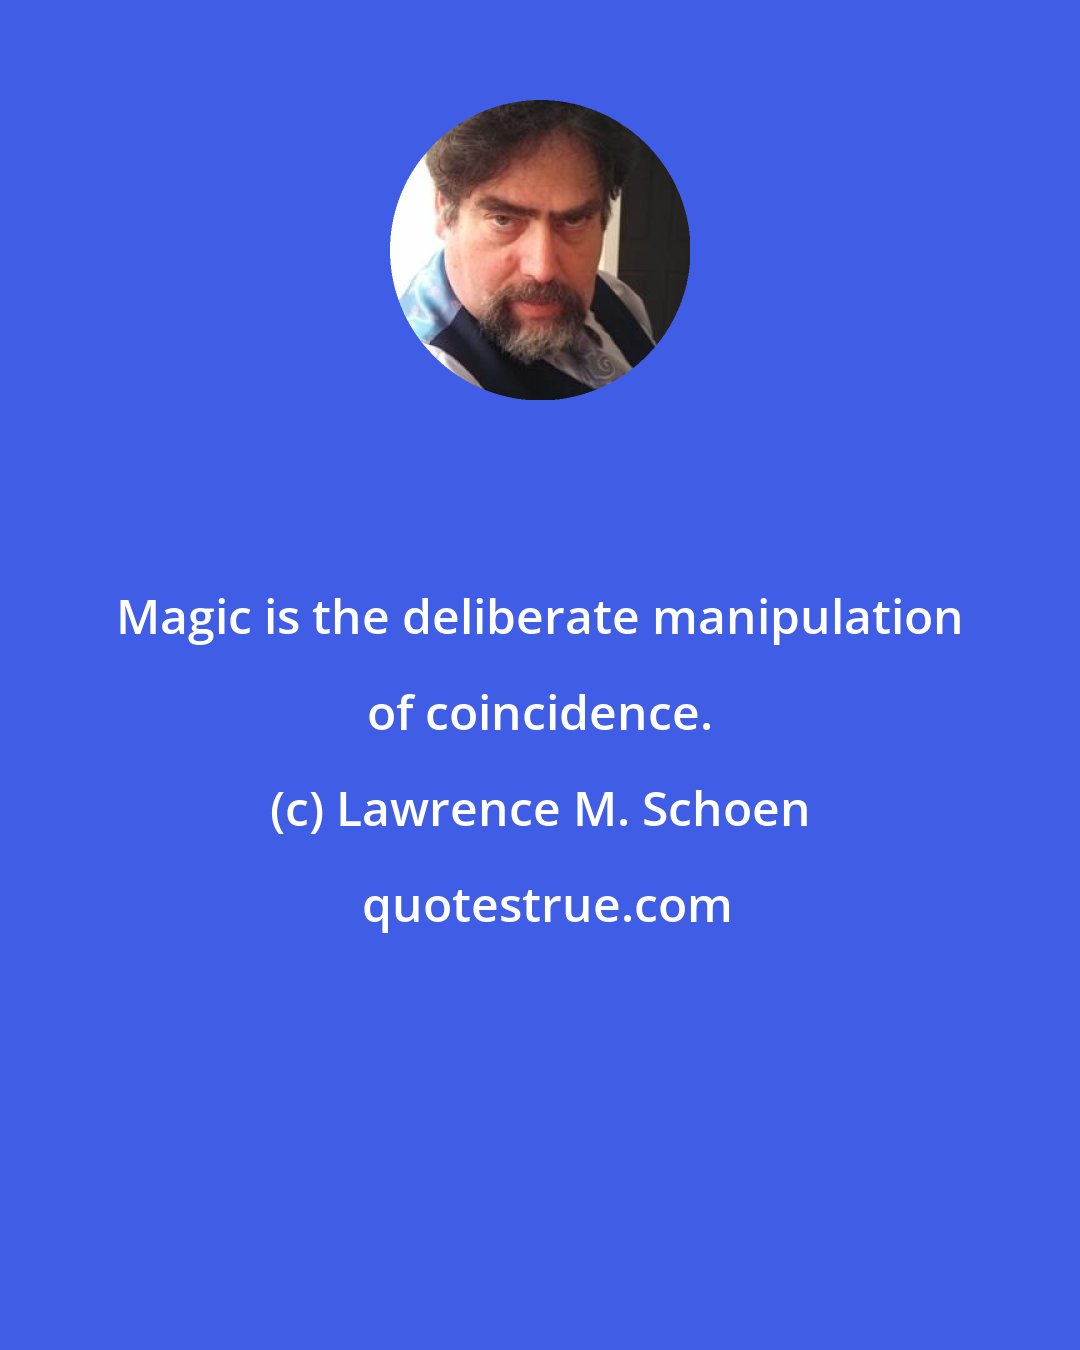 Lawrence M. Schoen: Magic is the deliberate manipulation of coincidence.